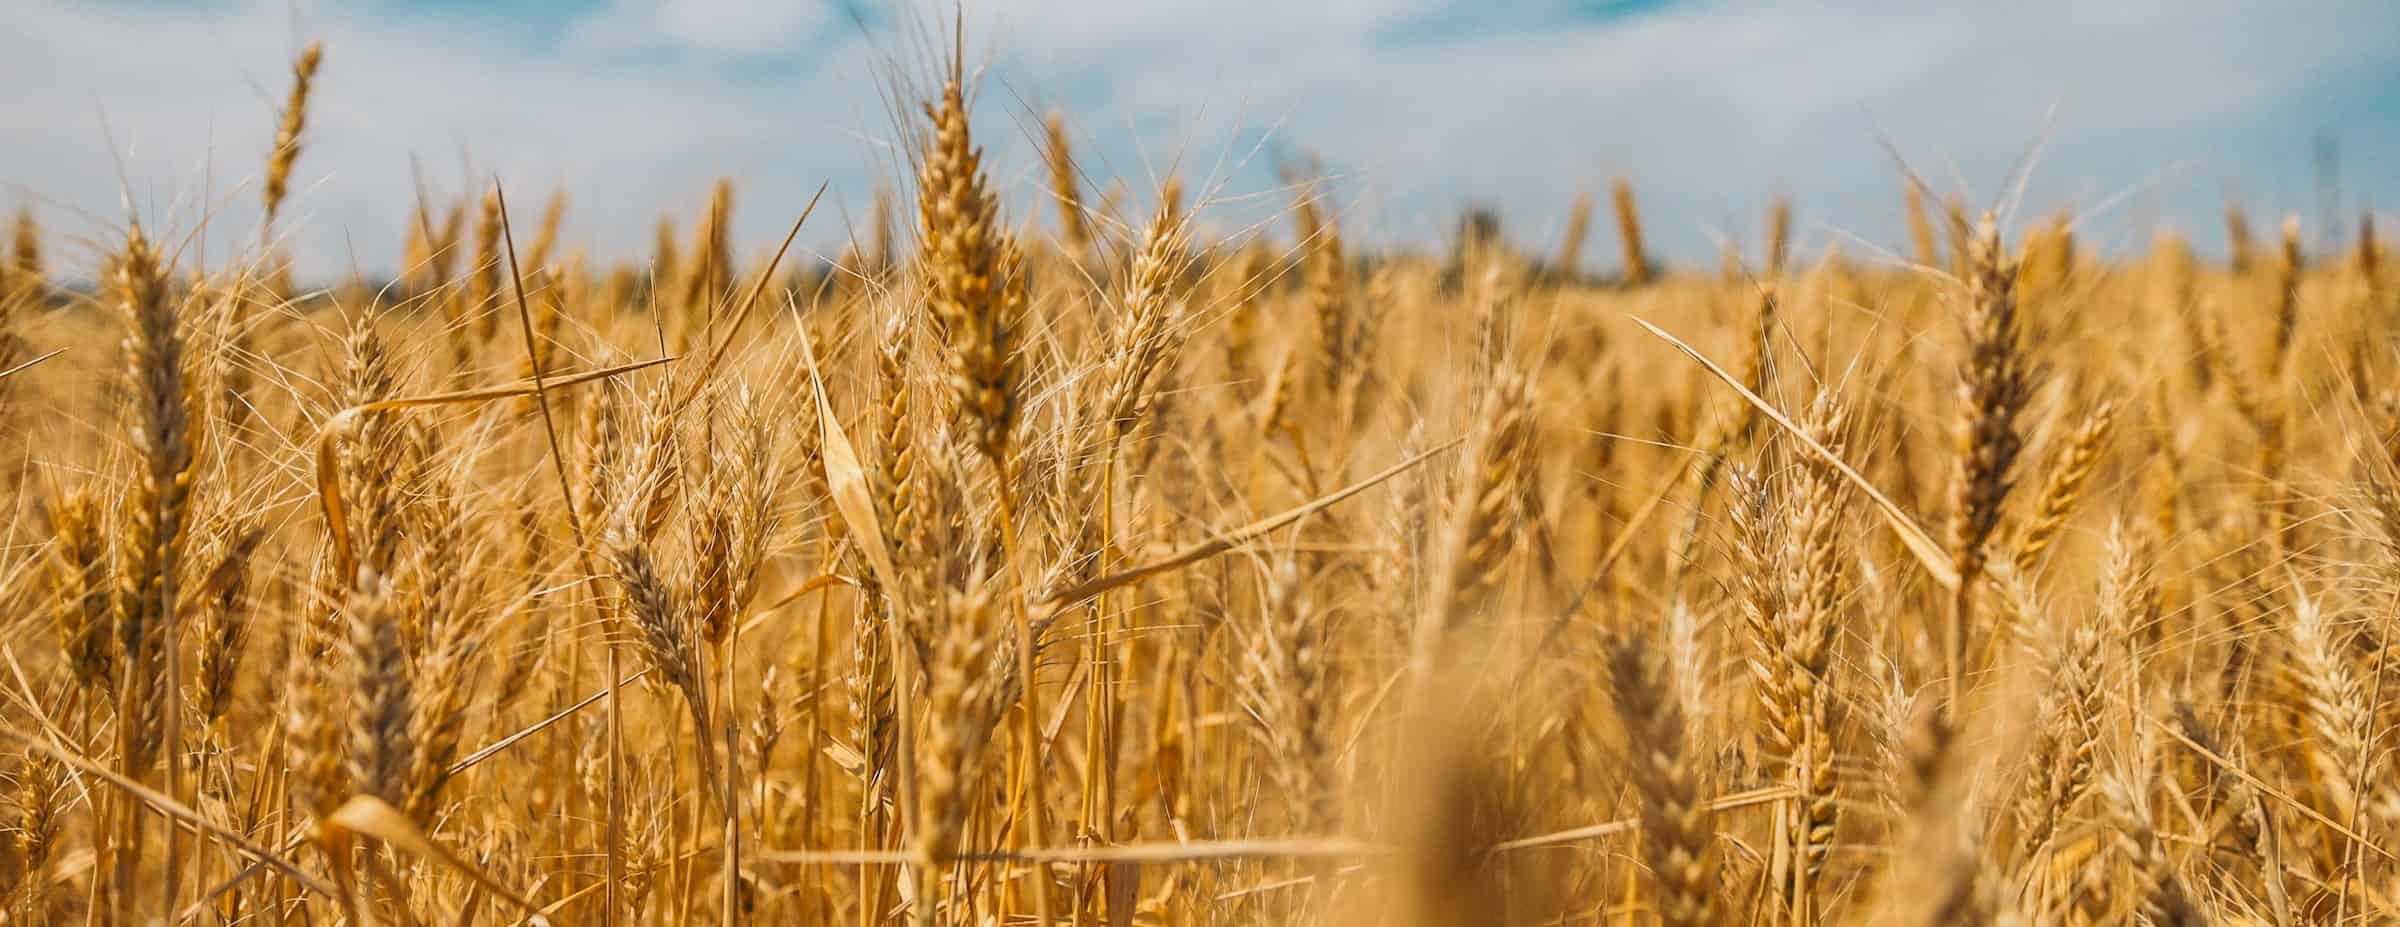 Grains category background